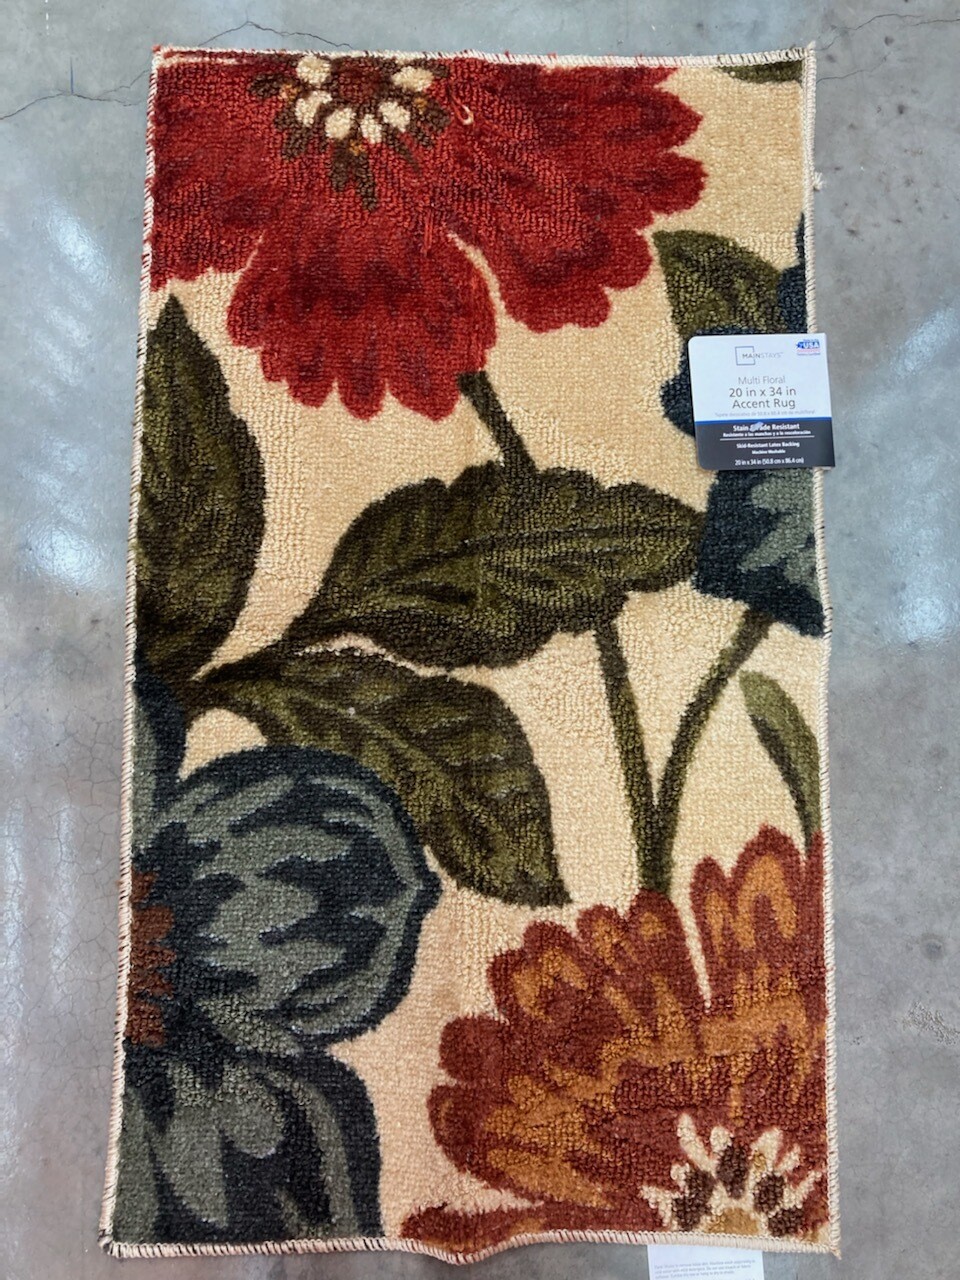 Accent Rug 20 x 34 Multi Floral, NEW  #2314